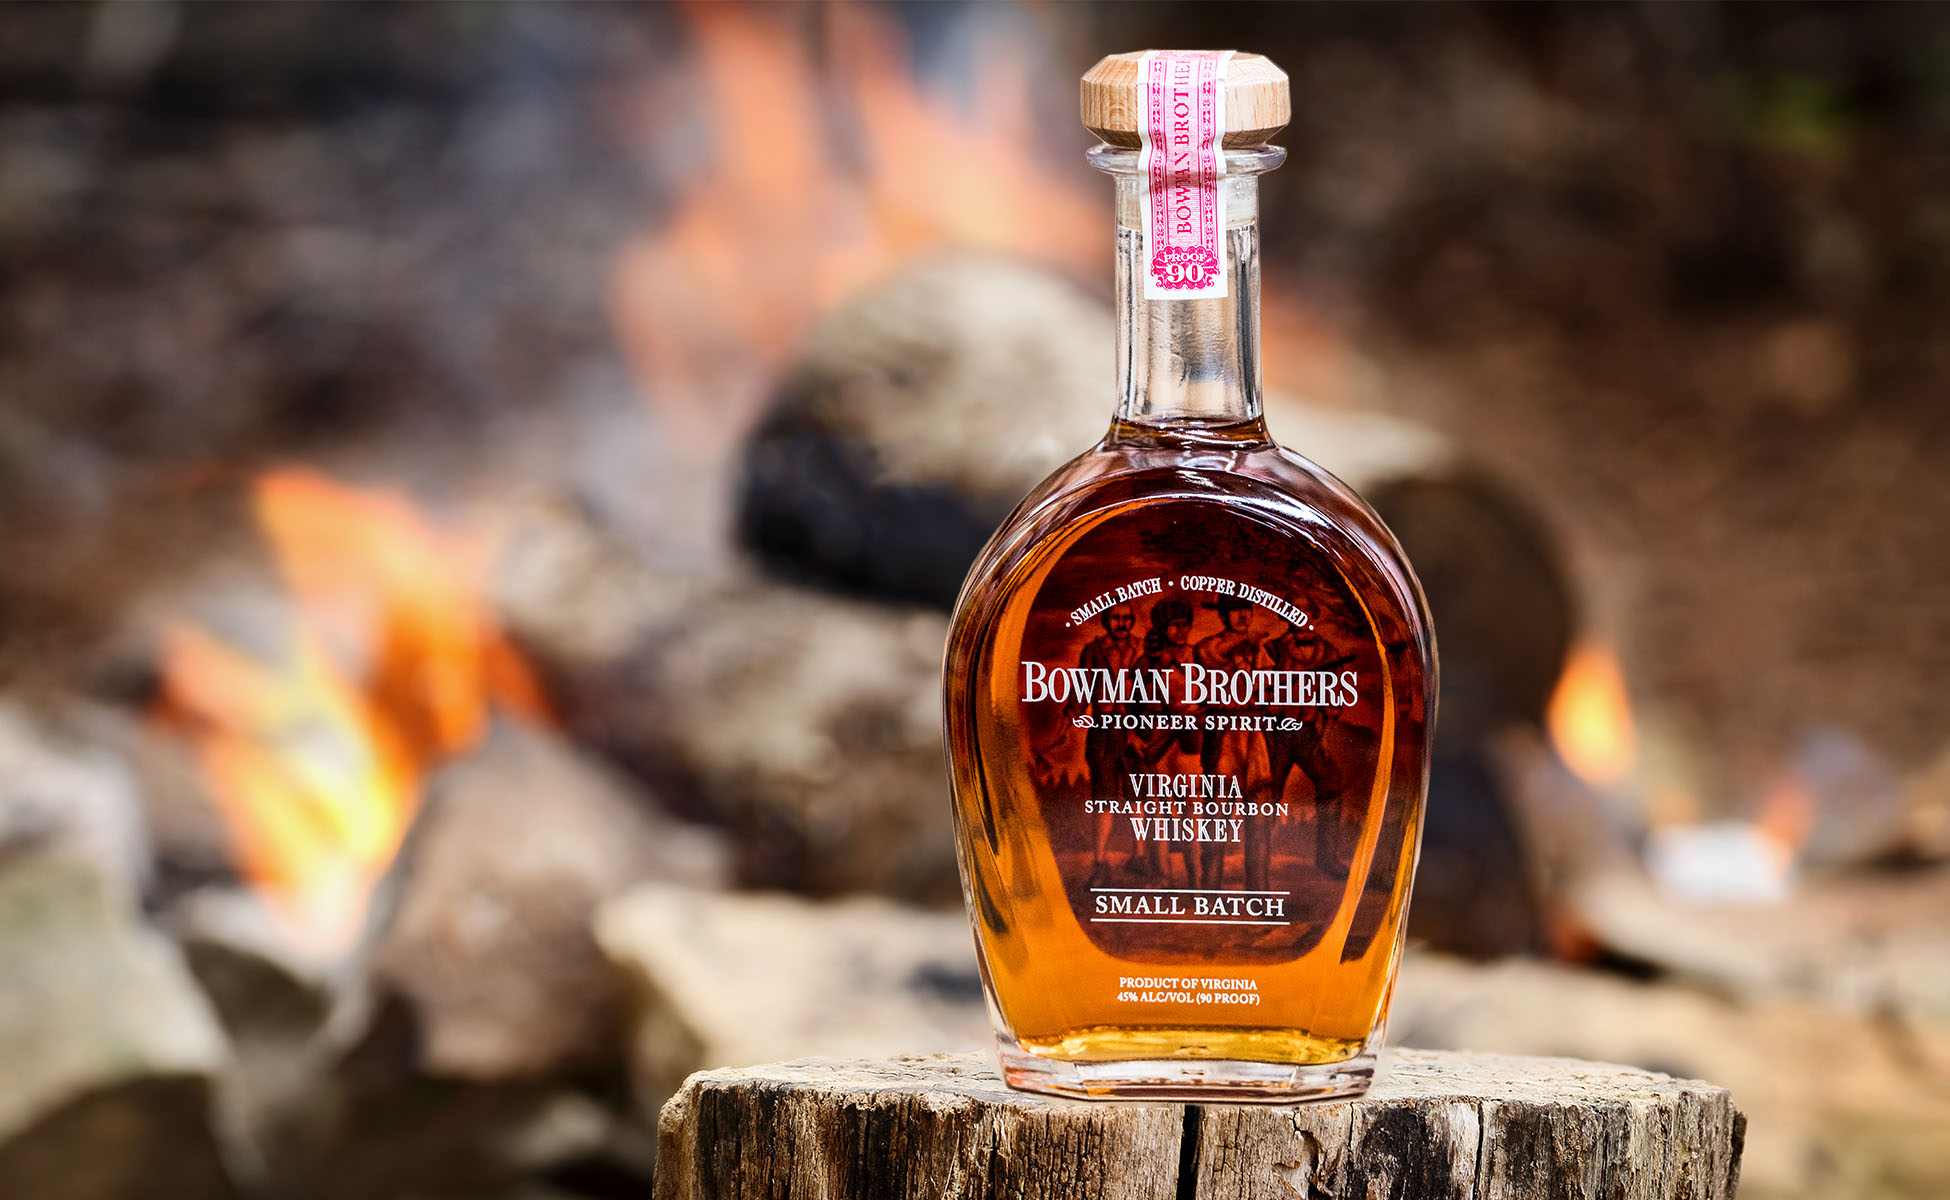 Bottle of Bowman Brothers by a campfire